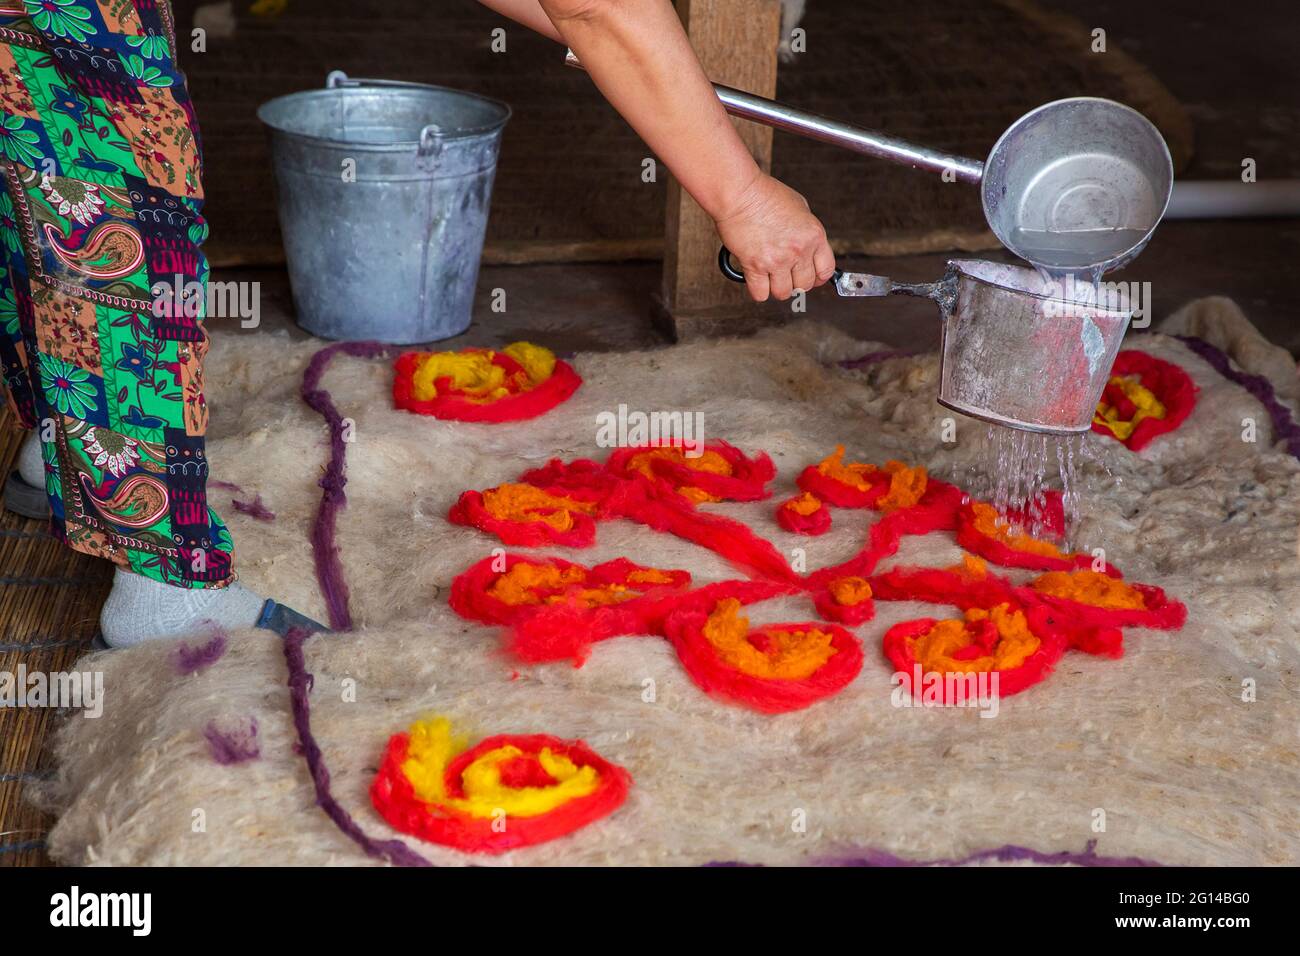 Making felt traditional way by putting hot water to sit the pattern on the felt carpet. Stock Photo